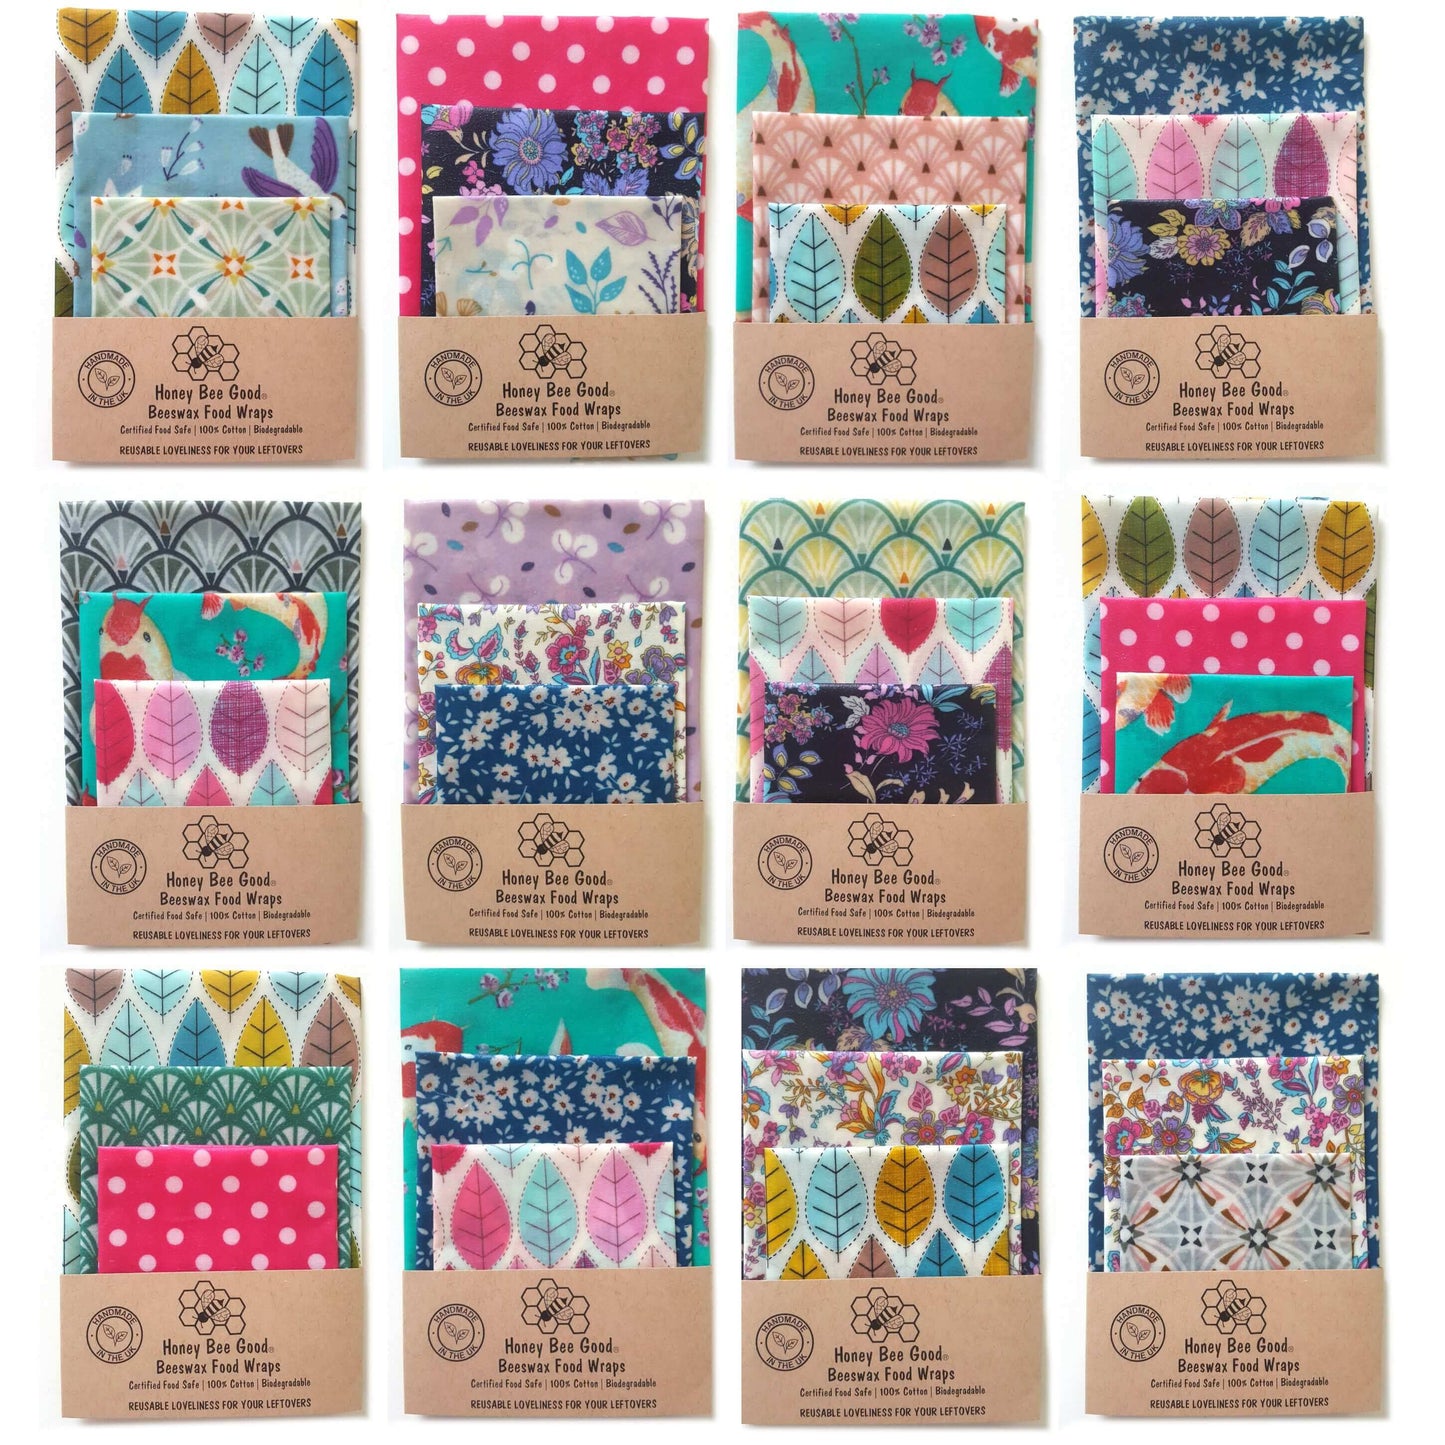 Reusable Beeswax Food Wraps 100% Hand Made in the UK by Honey Bee Good. Bargain sets